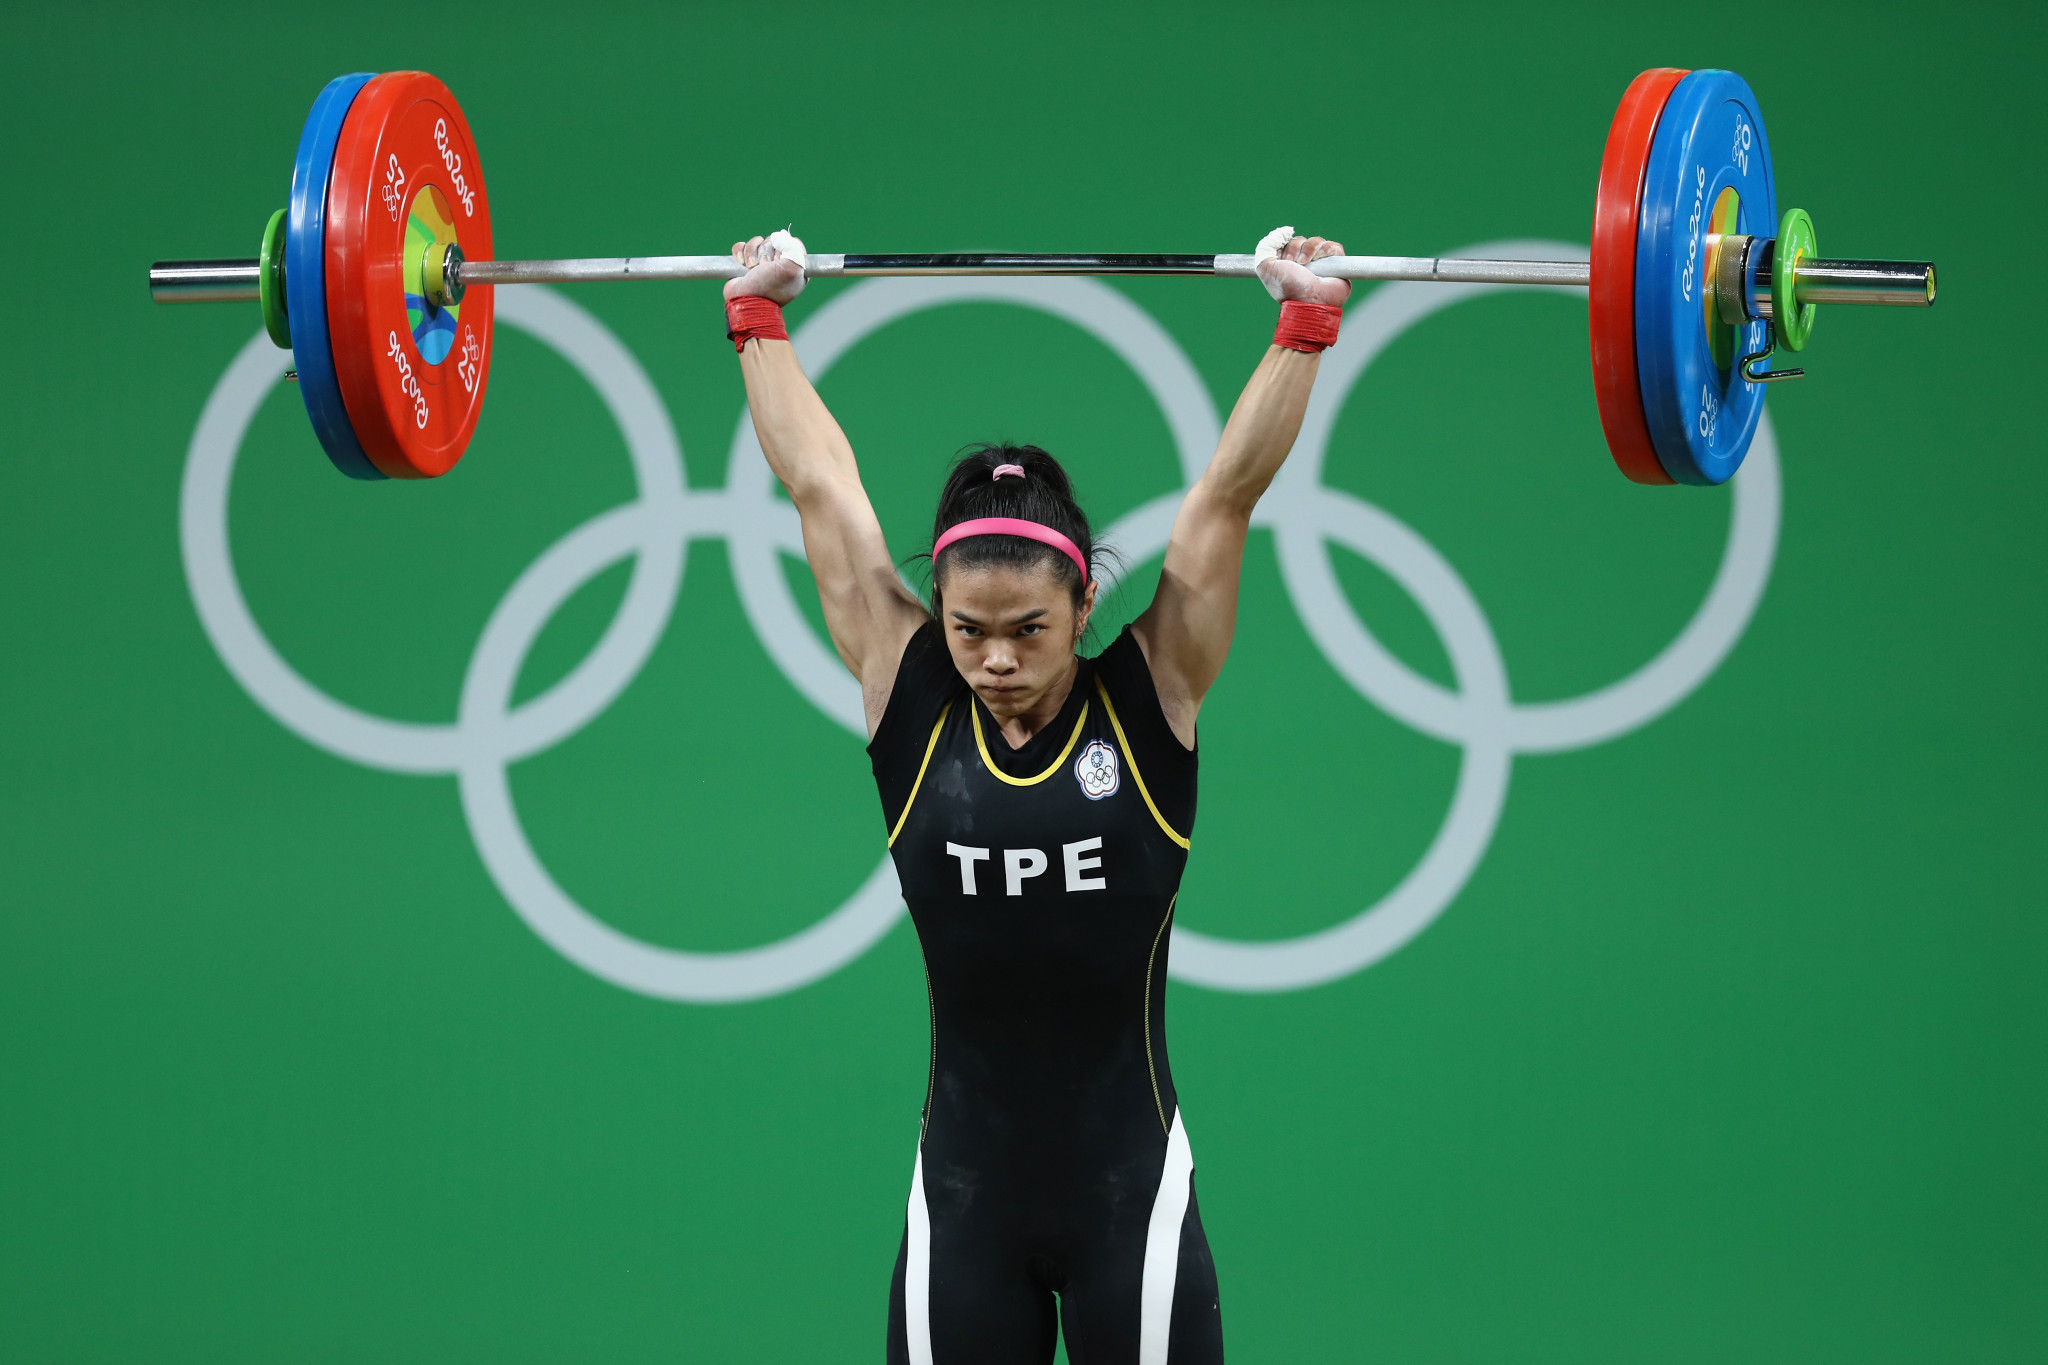 Weightlifter Hsu Shu-ching was Chinese Taipei's sole gold medallist at the Rio 2016 Olympic Games, winning the women's 53 kilograms event ©Getty Images